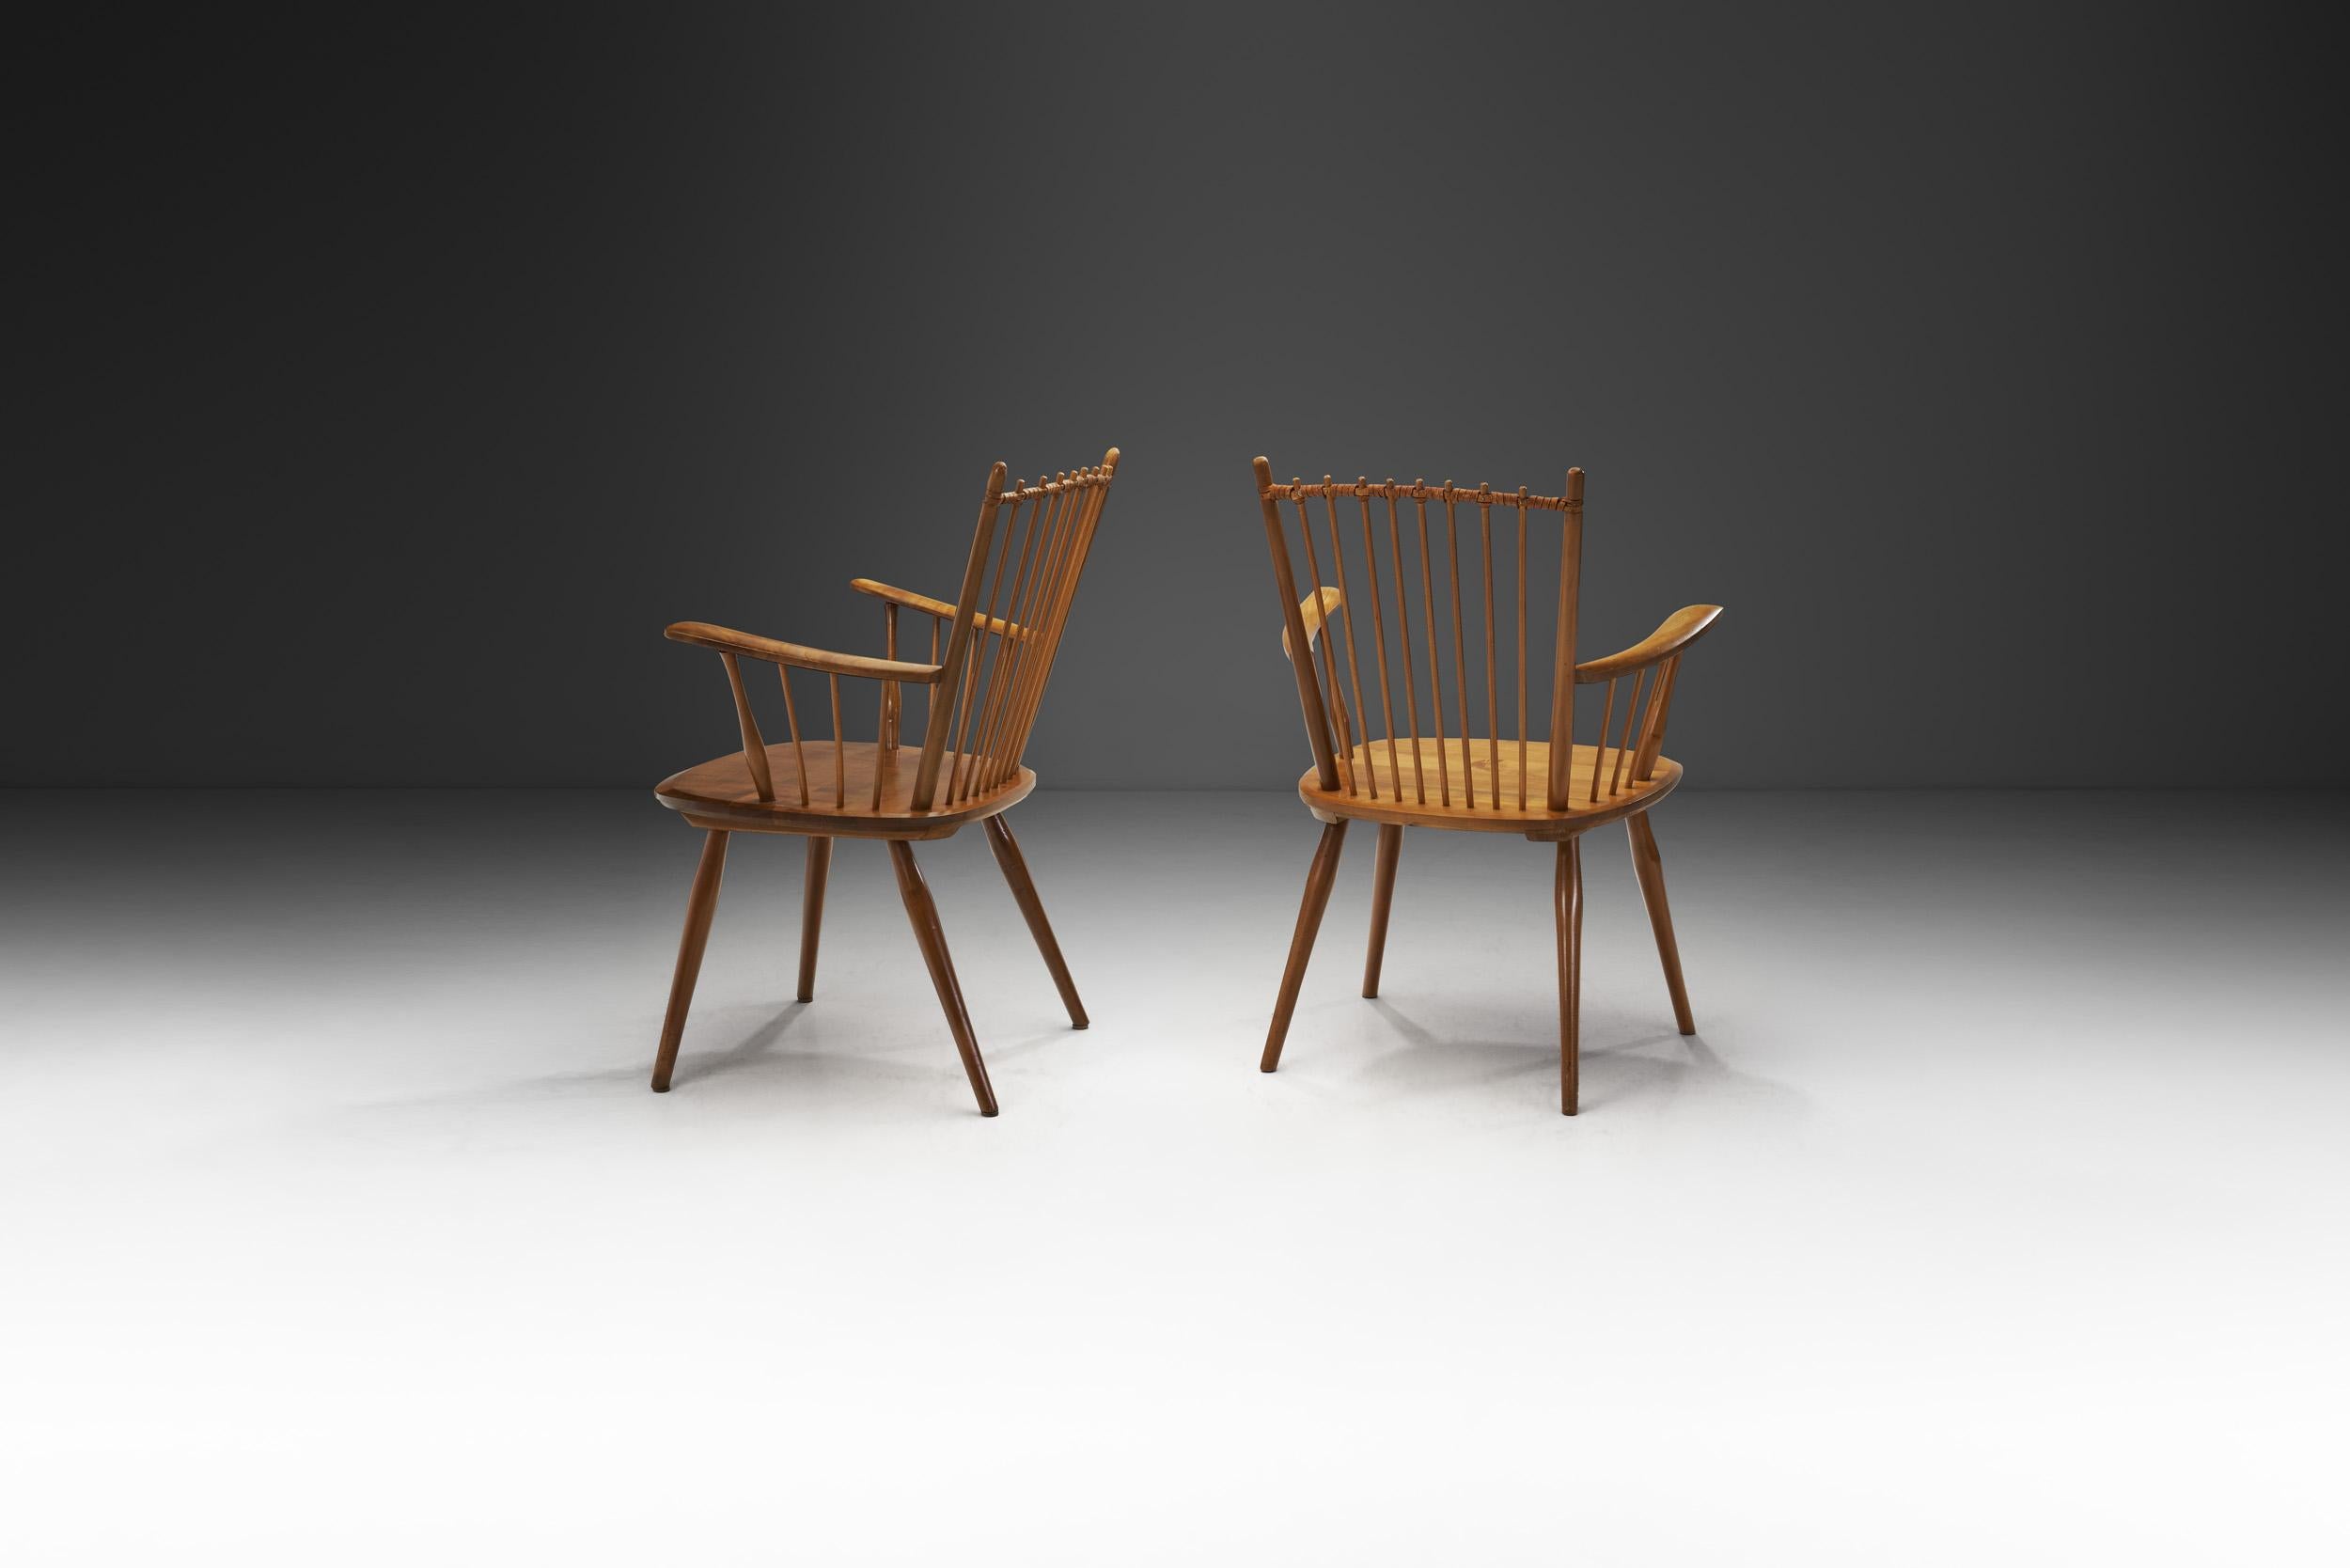 Mid-20th Century Albert Haberer Cherry Wood Chairs for Hermann Fleiner, Germany 1950s For Sale